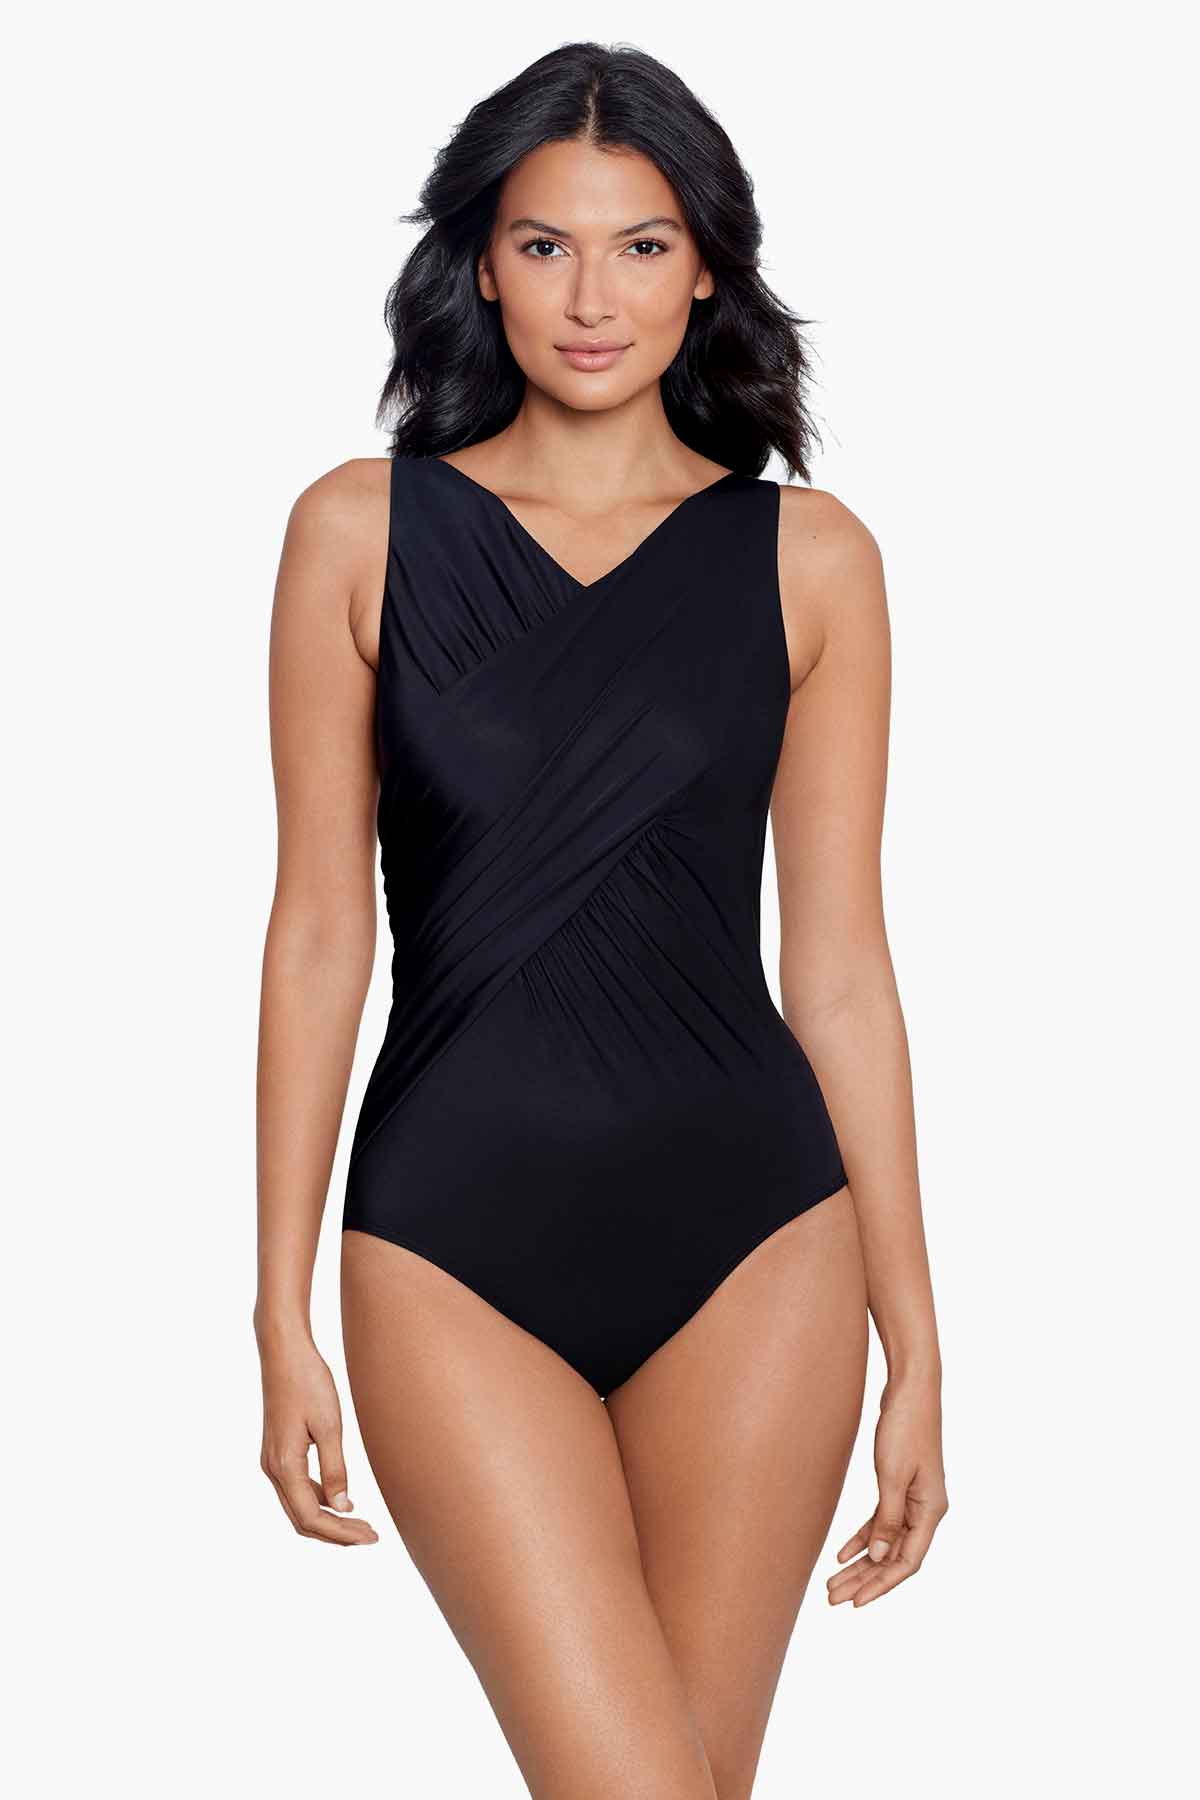 NEW Dreamsuit by Miracle Brands Slimming Control Wrap One Piece Swimsuit  Wms 24W